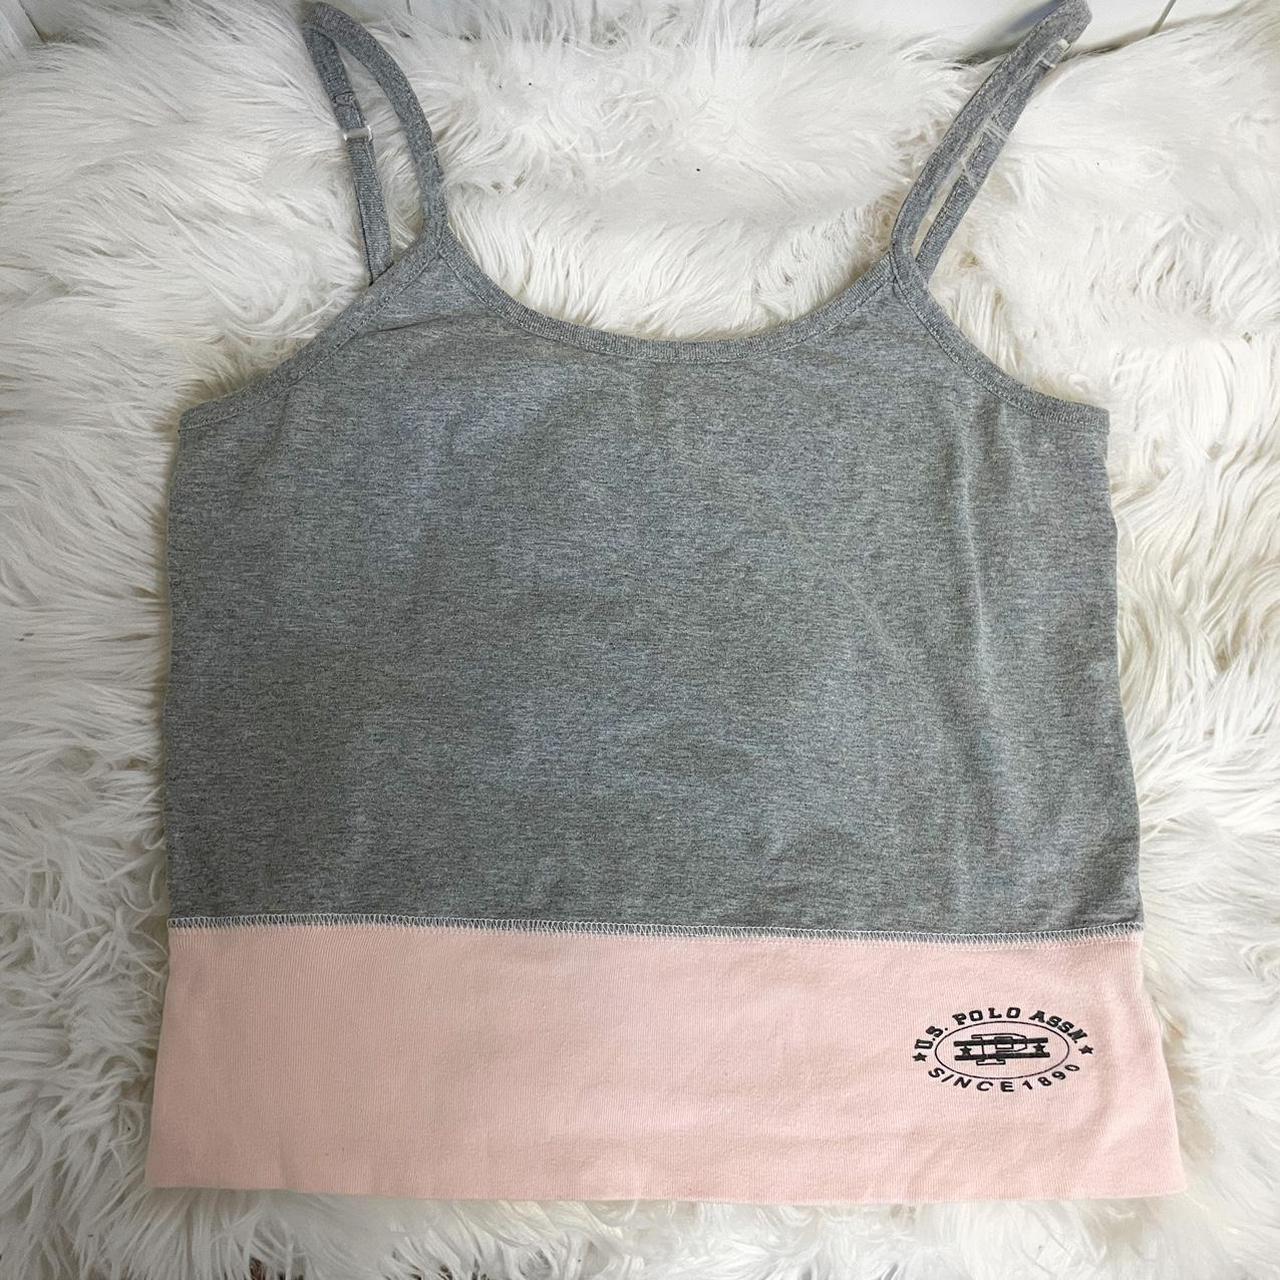 U.S. Polo Assn. Women's Grey and Pink Vest